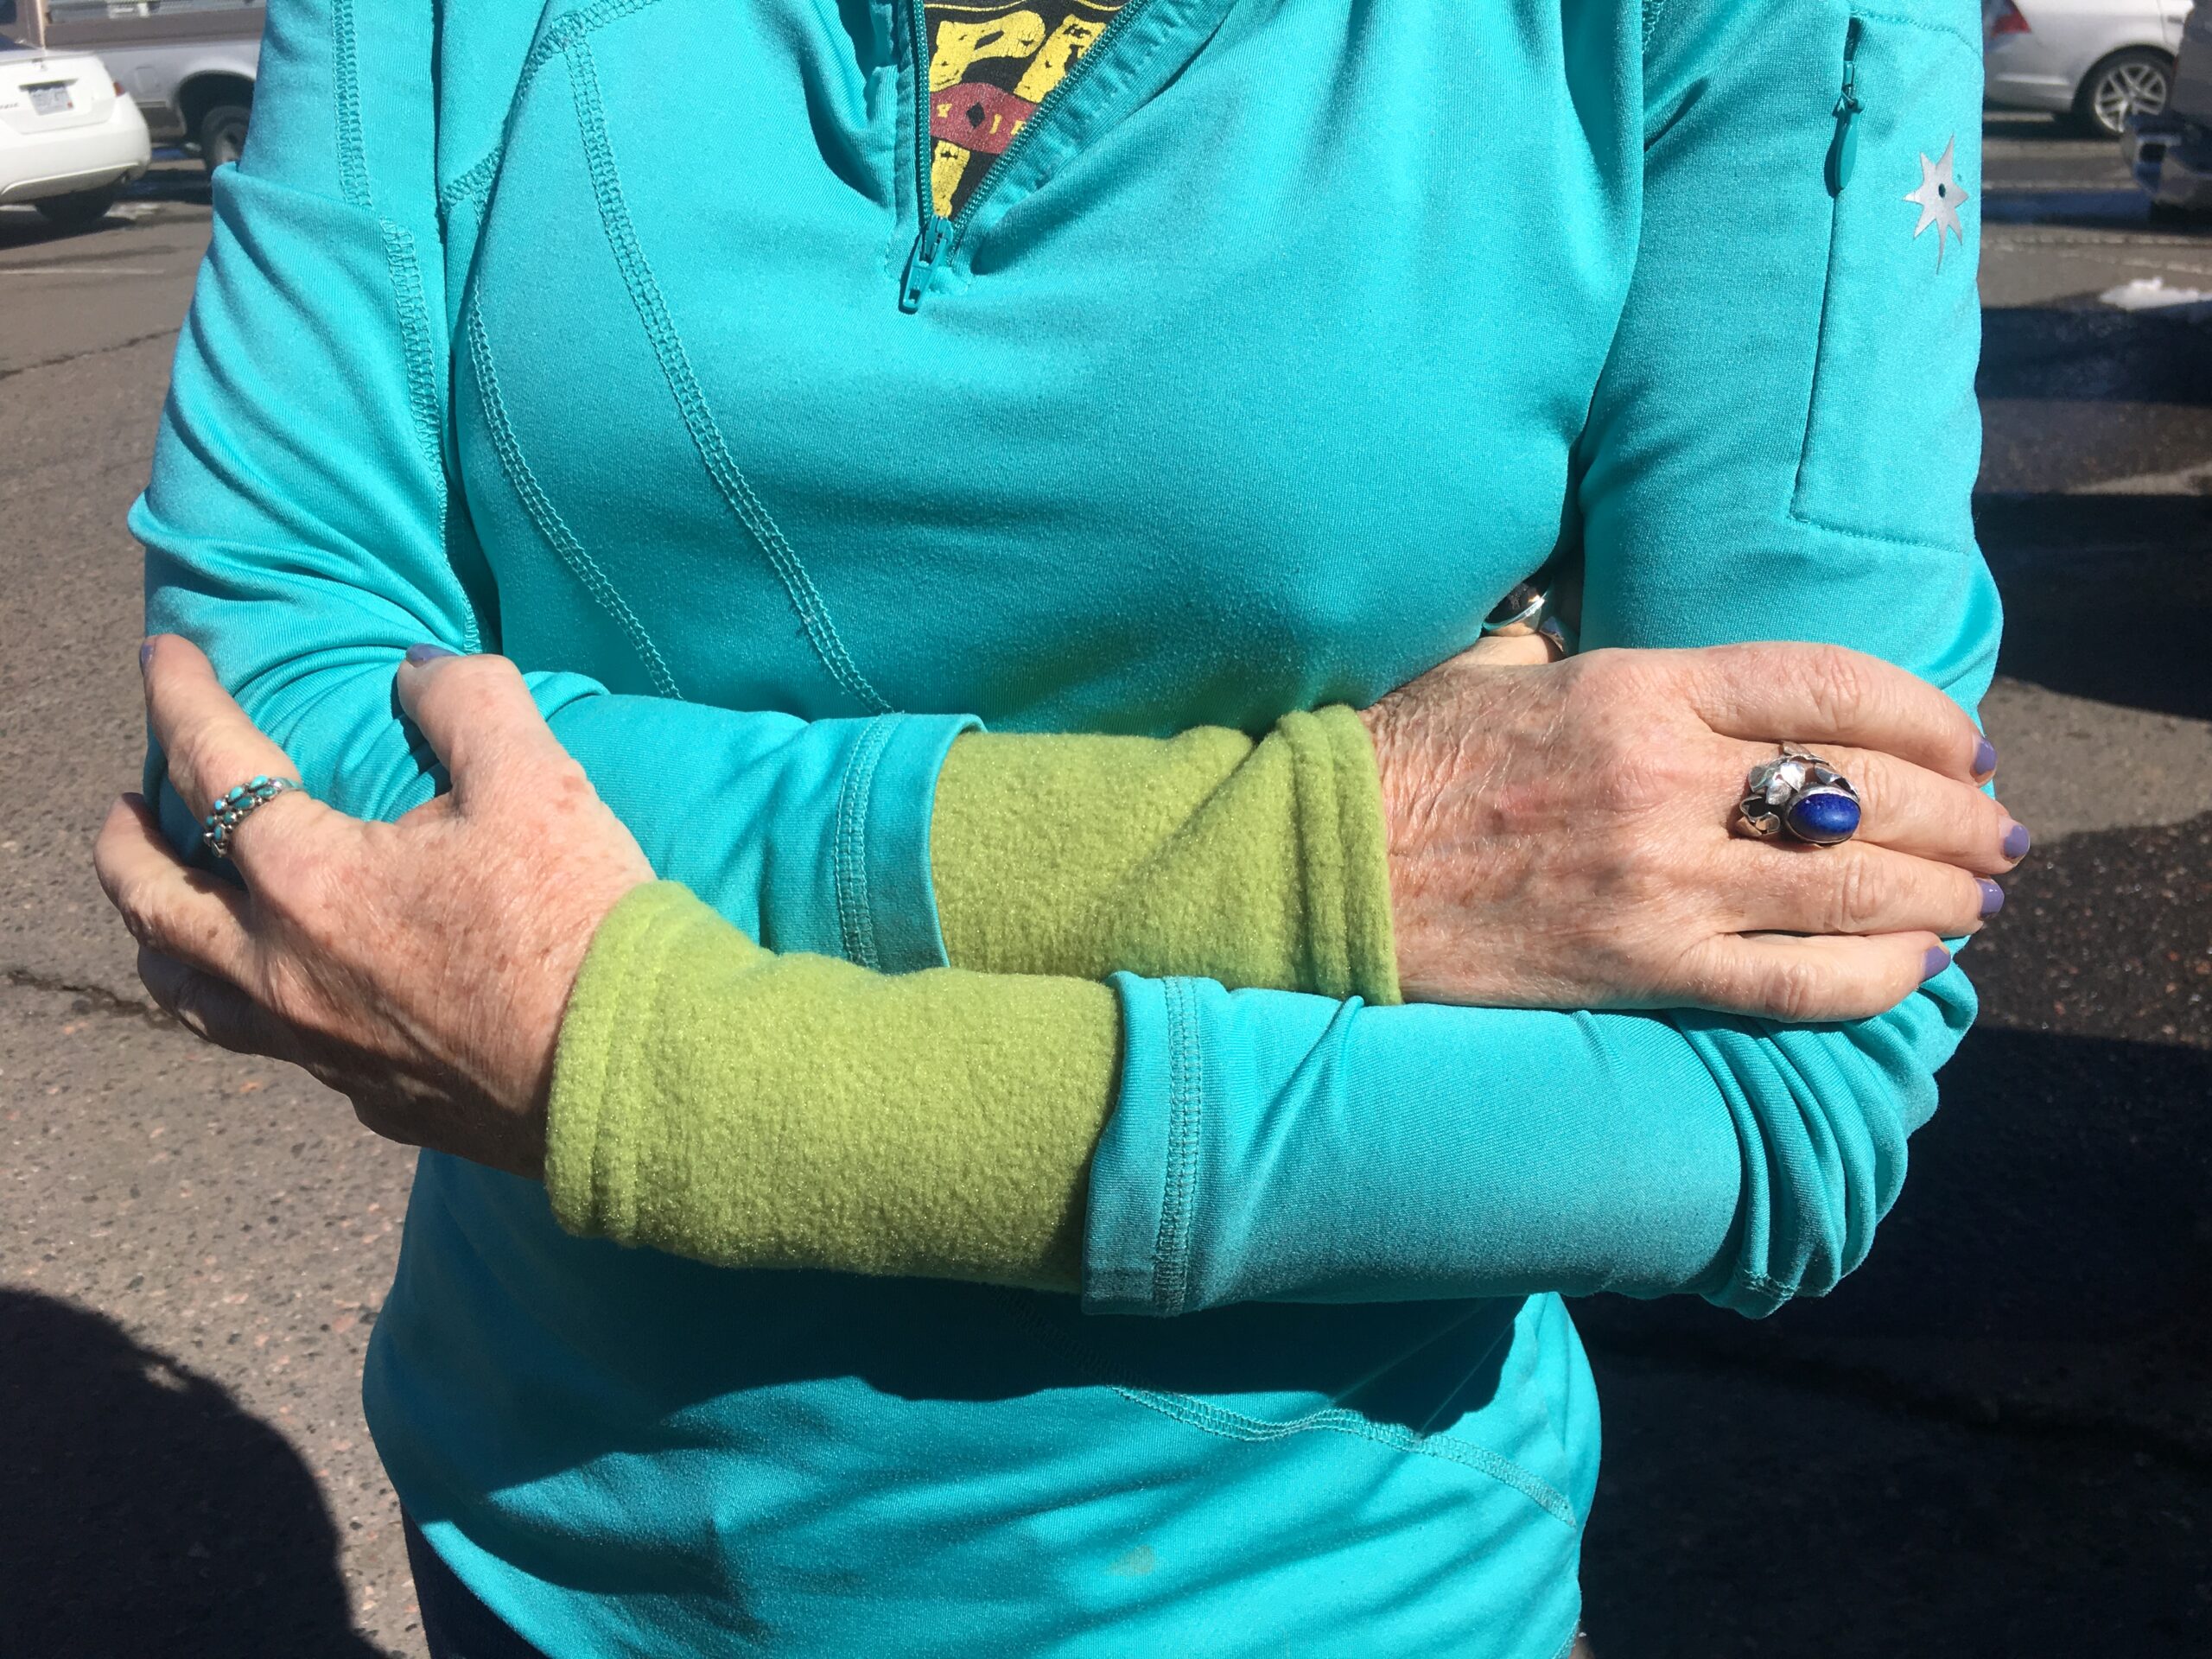 Gallery of Wrist Warmer green picture of wrist warmers women in blue bloused with green pair on